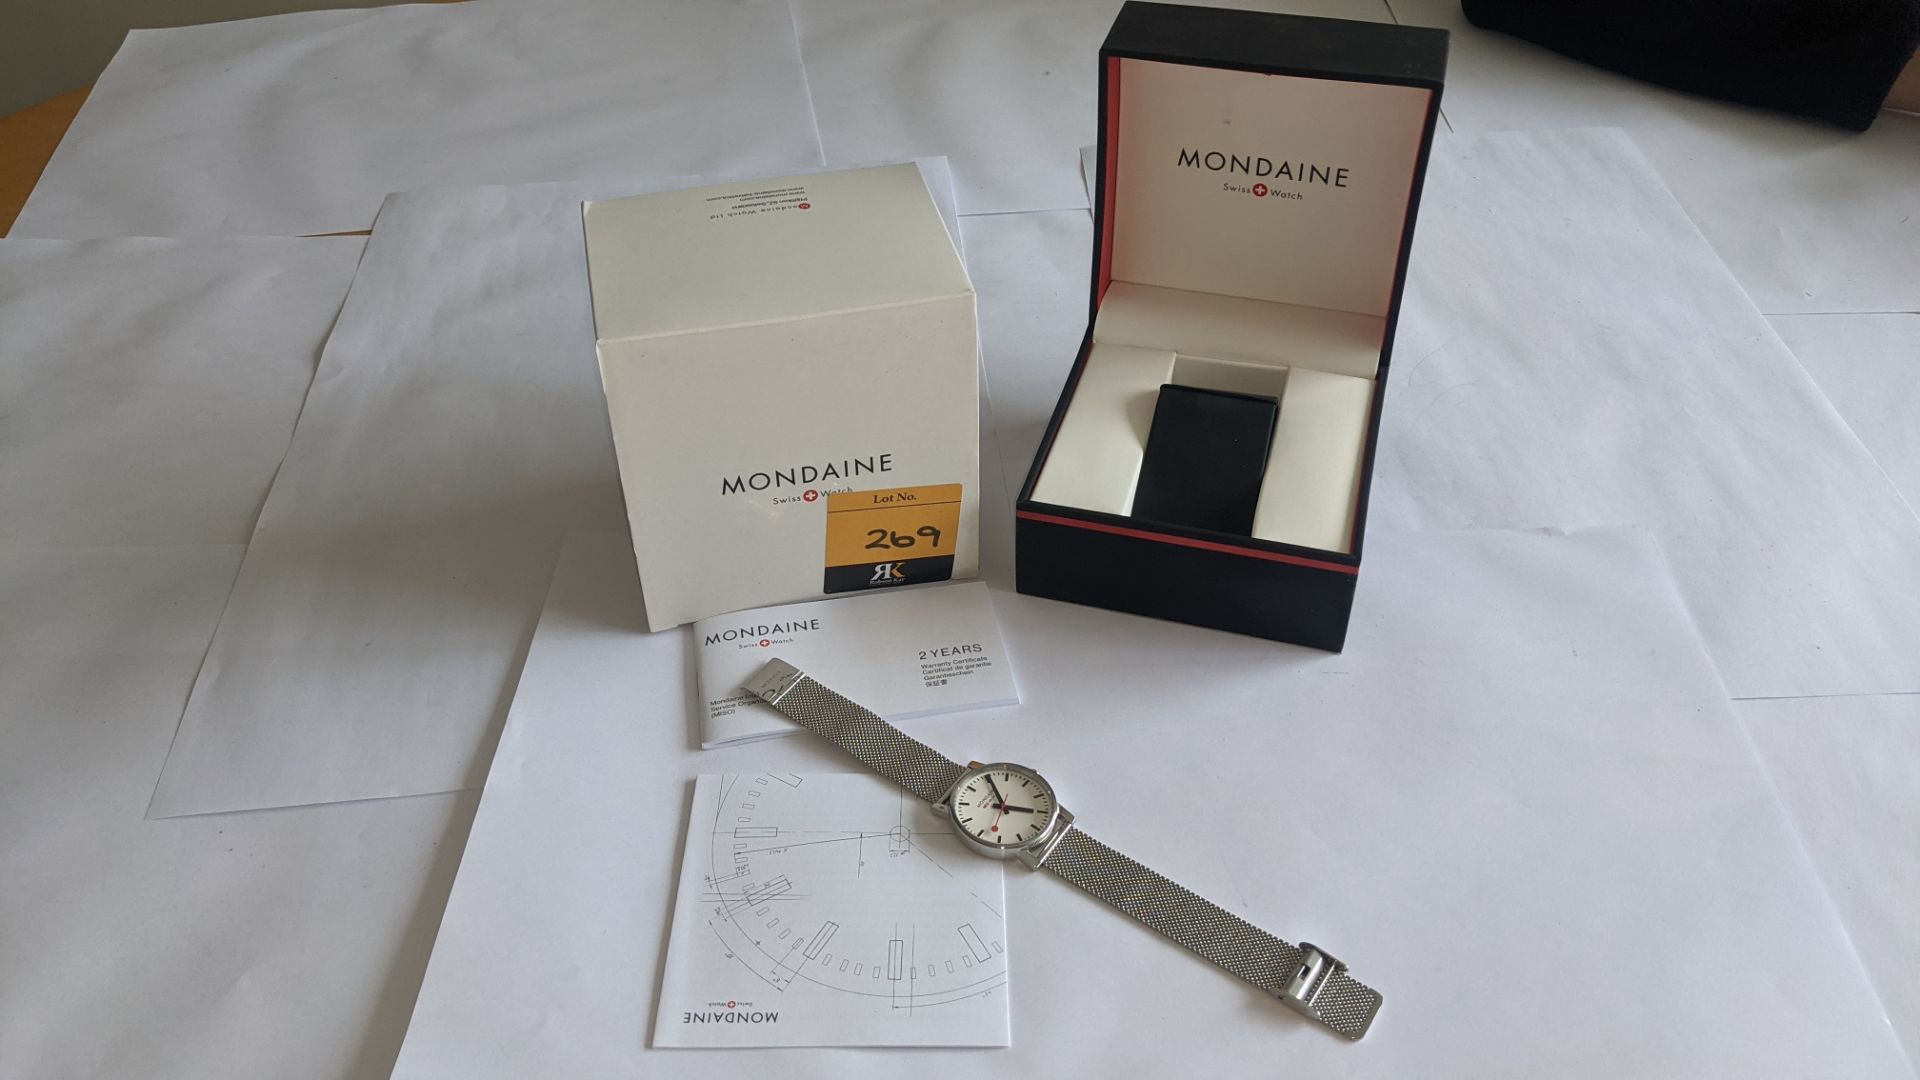 Mondaine watch on metal strap. Official Swiss Railways watch. No price tag. Stainless steel case, wa - Image 2 of 17